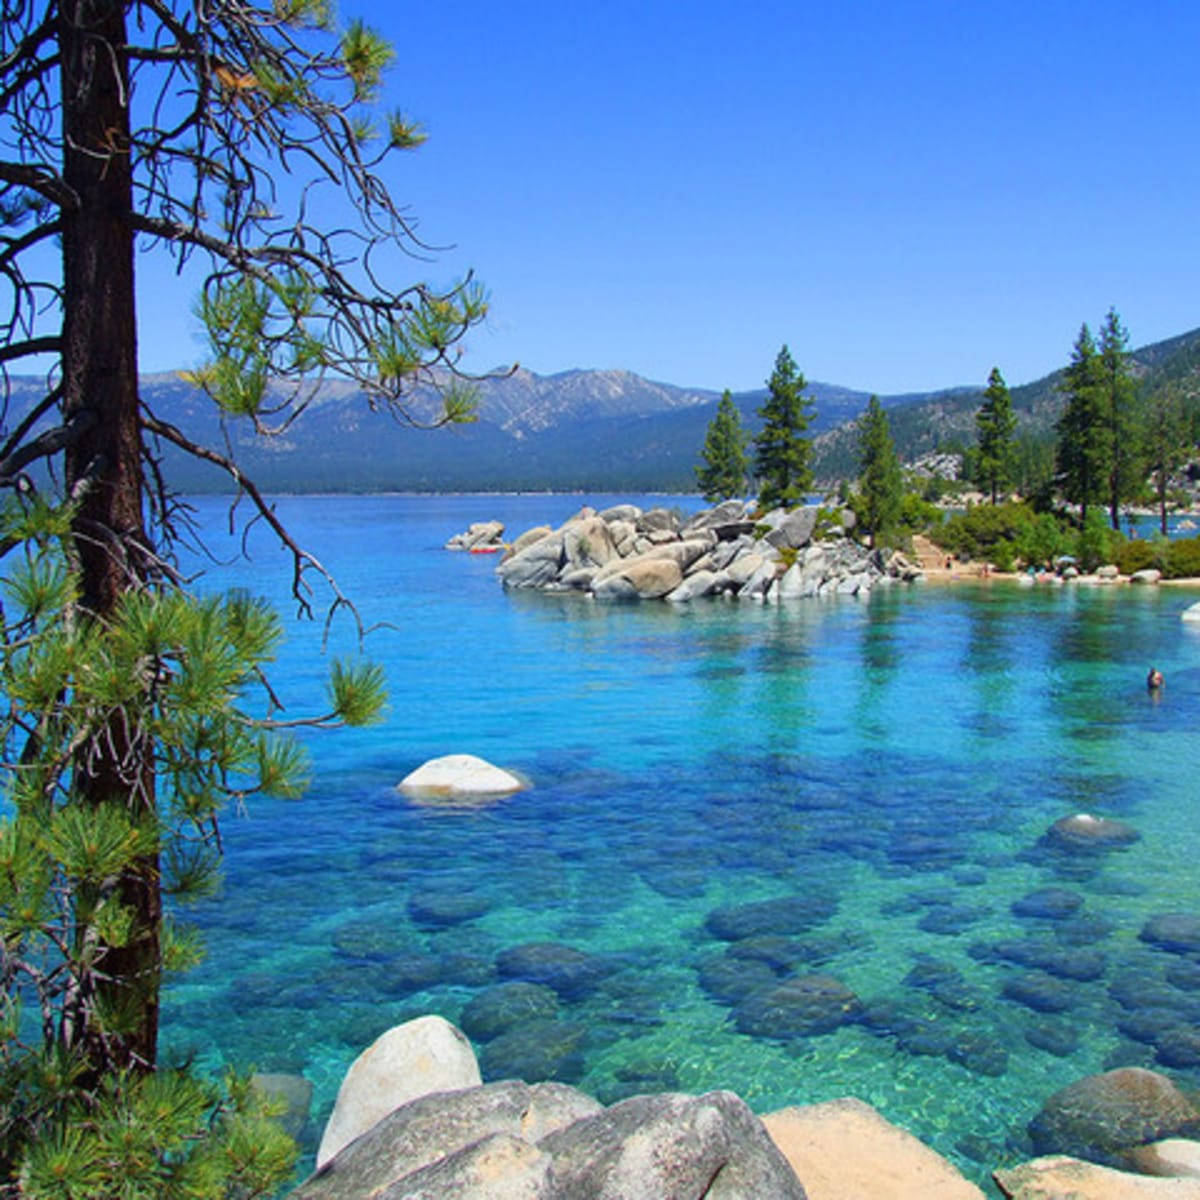 5 Reasons Why Fall is the Best Time to Visit Lake Tahoe - Men's